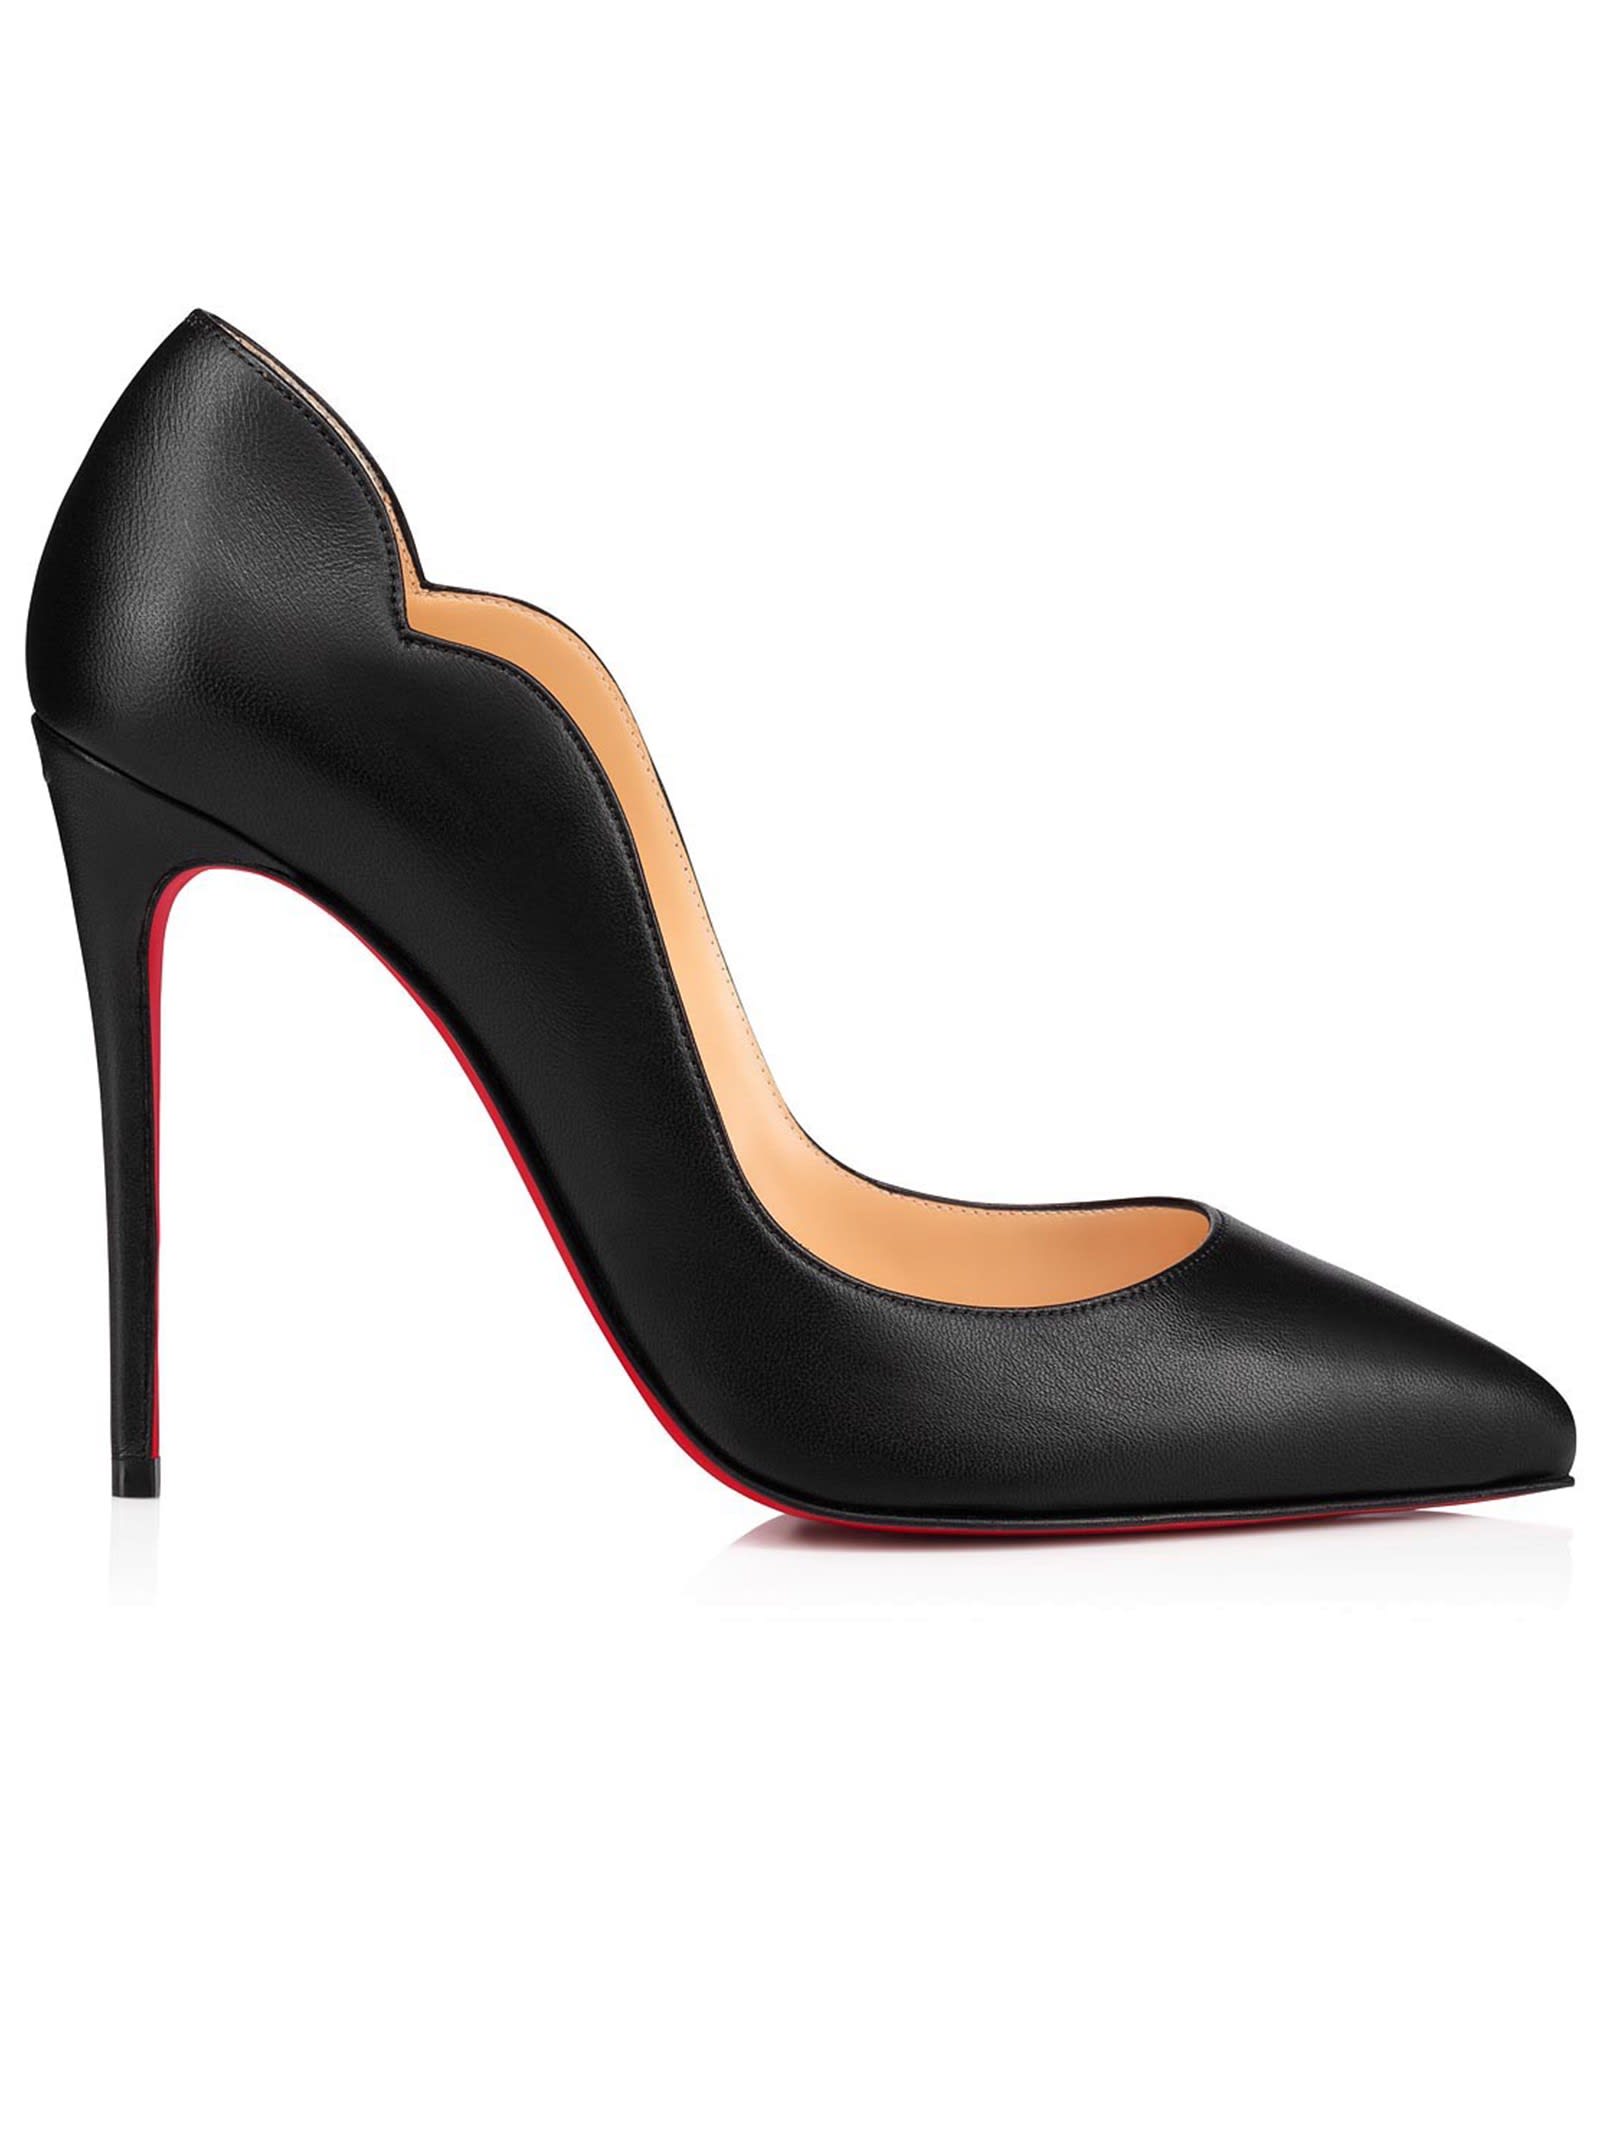 Buy Christian Louboutin Black Leather Hot Chick Pumps online, shop Christian Louboutin shoes with free shipping